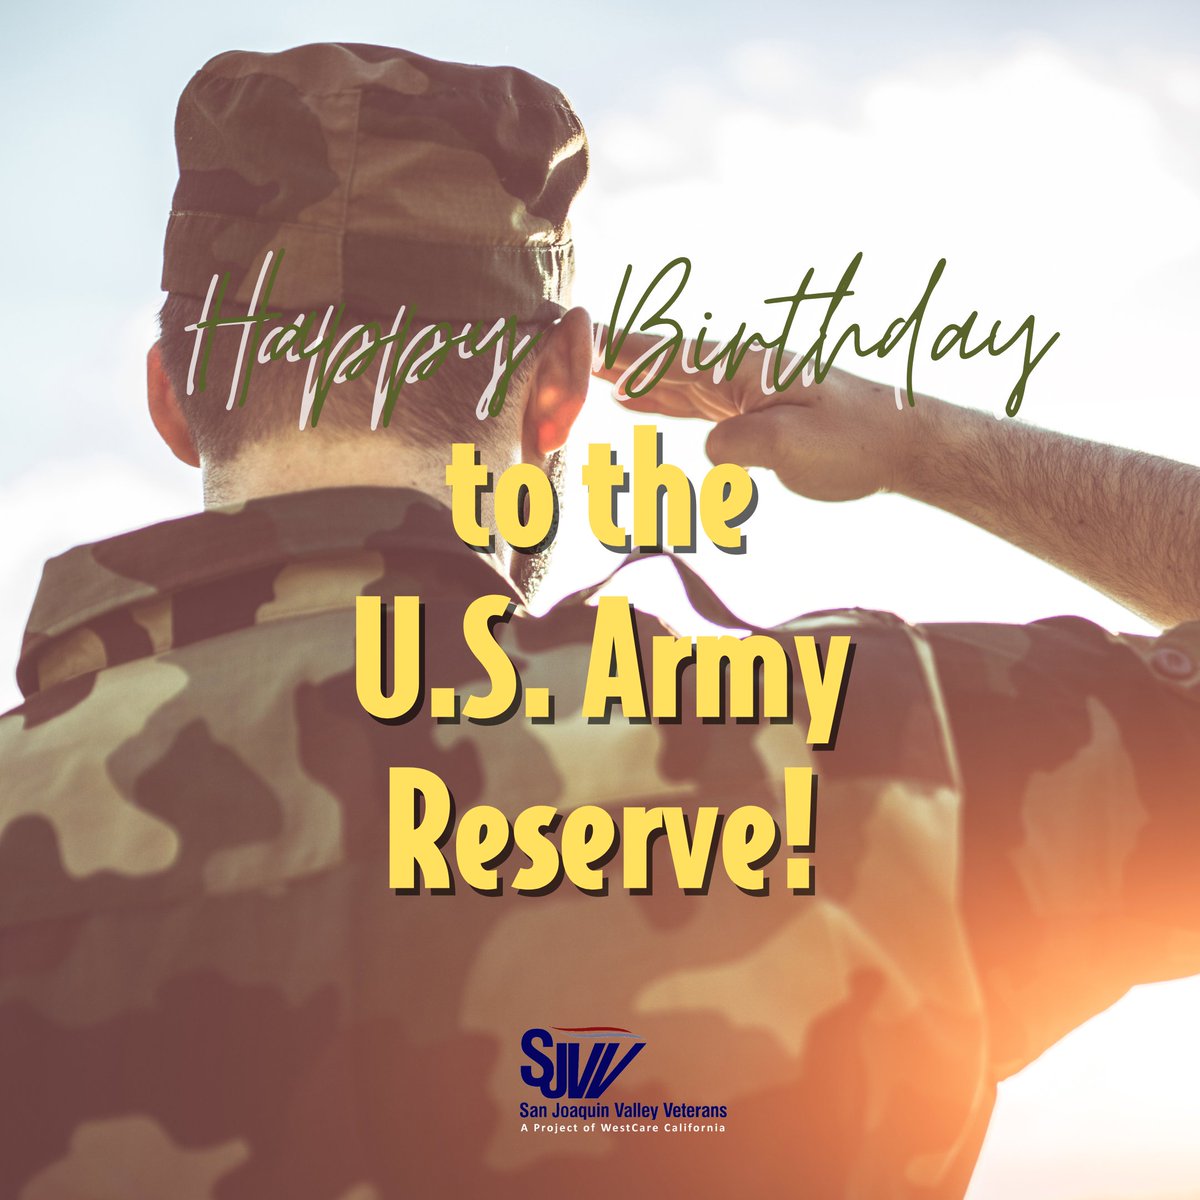 Celebrating 116 years, The U.S. Army Reserve continues to offer over 120 different career fields. Thank you to all of the 200,000 soldiers and veterans who have served under this branch! 💛💚🖤 #USARBirthday116 #HappyBirthday